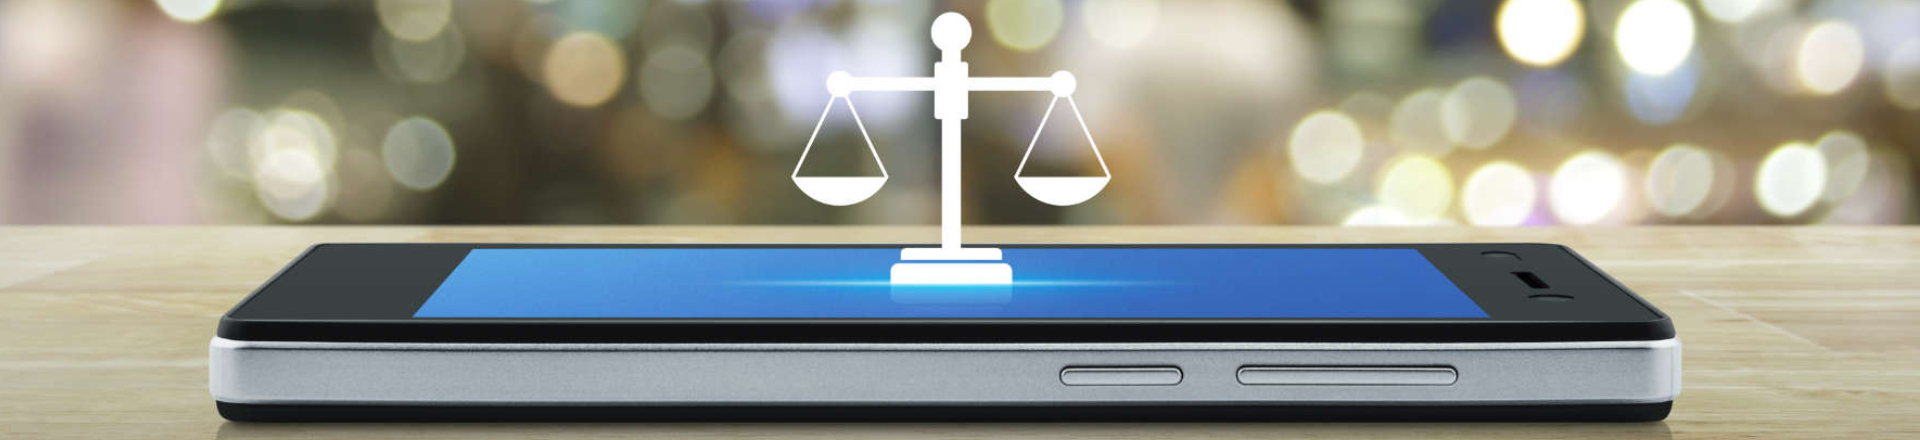 a symbol of justice scales on a smartphone